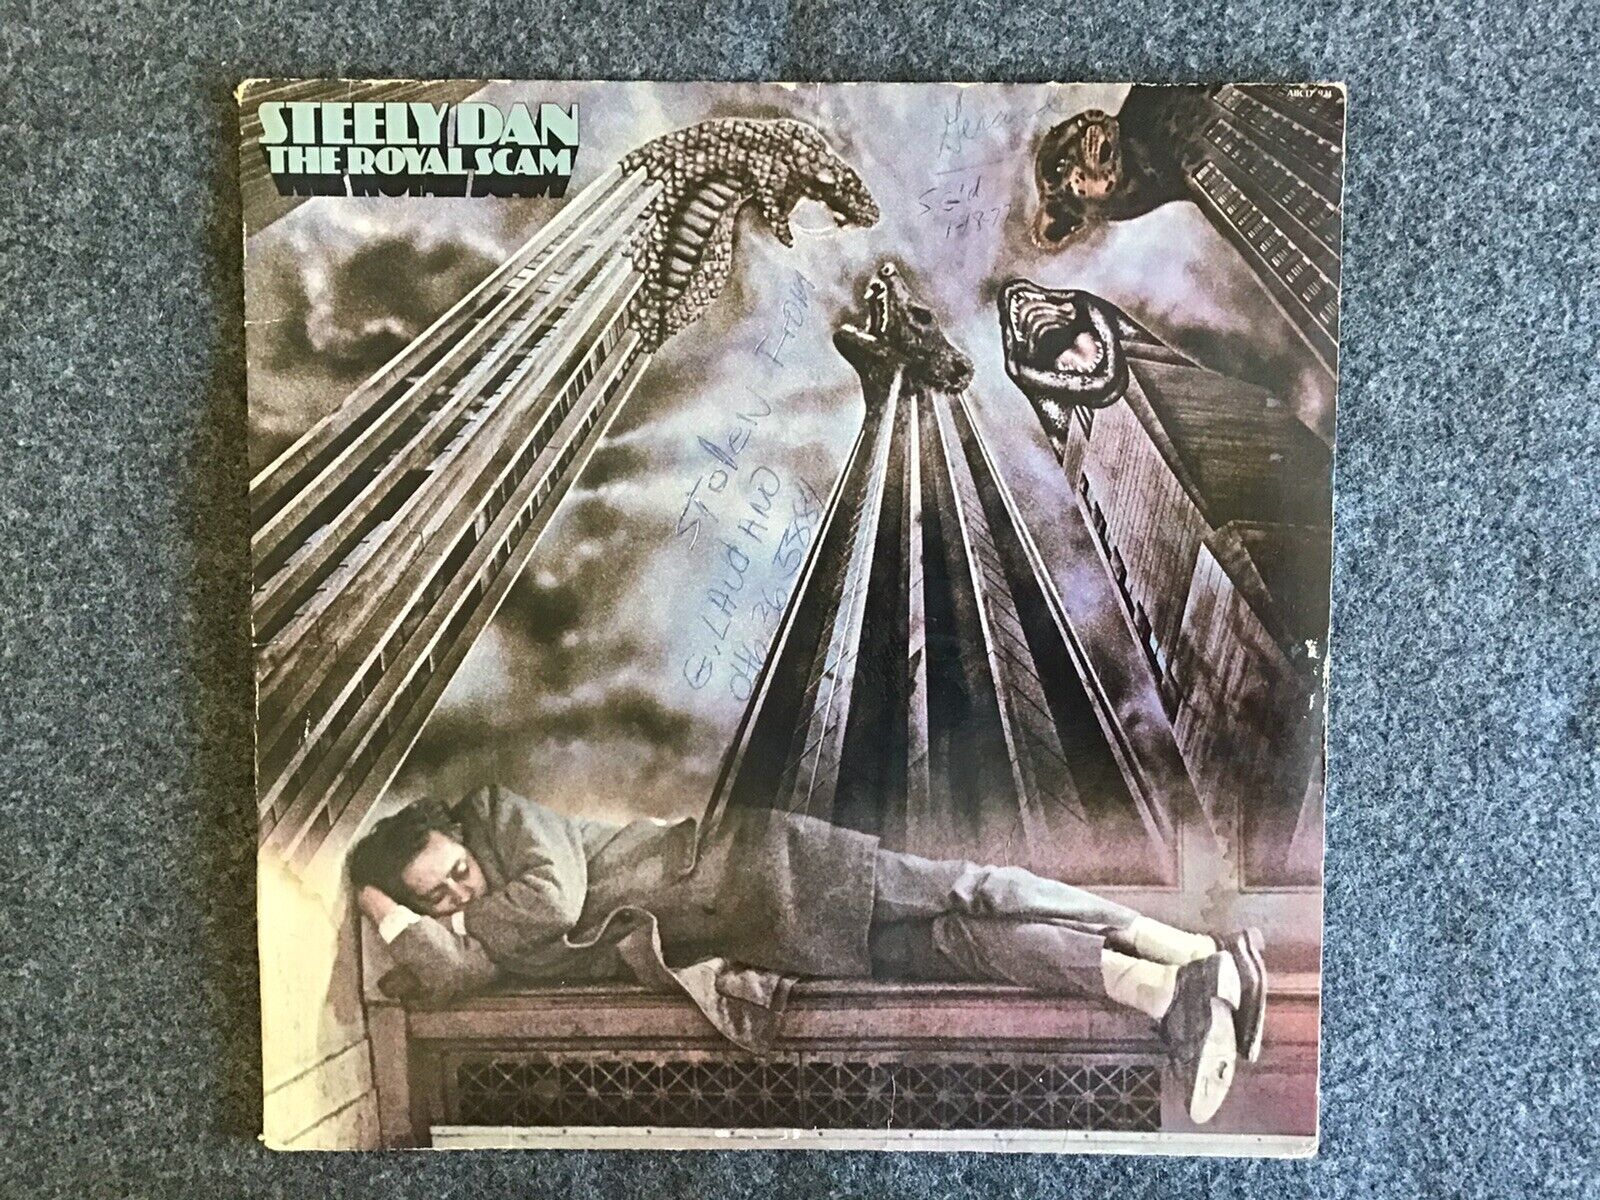 STEELY DAN LP The Royal Scam 1st Press 1976 ABC Records ABCD-931 VG+/VG